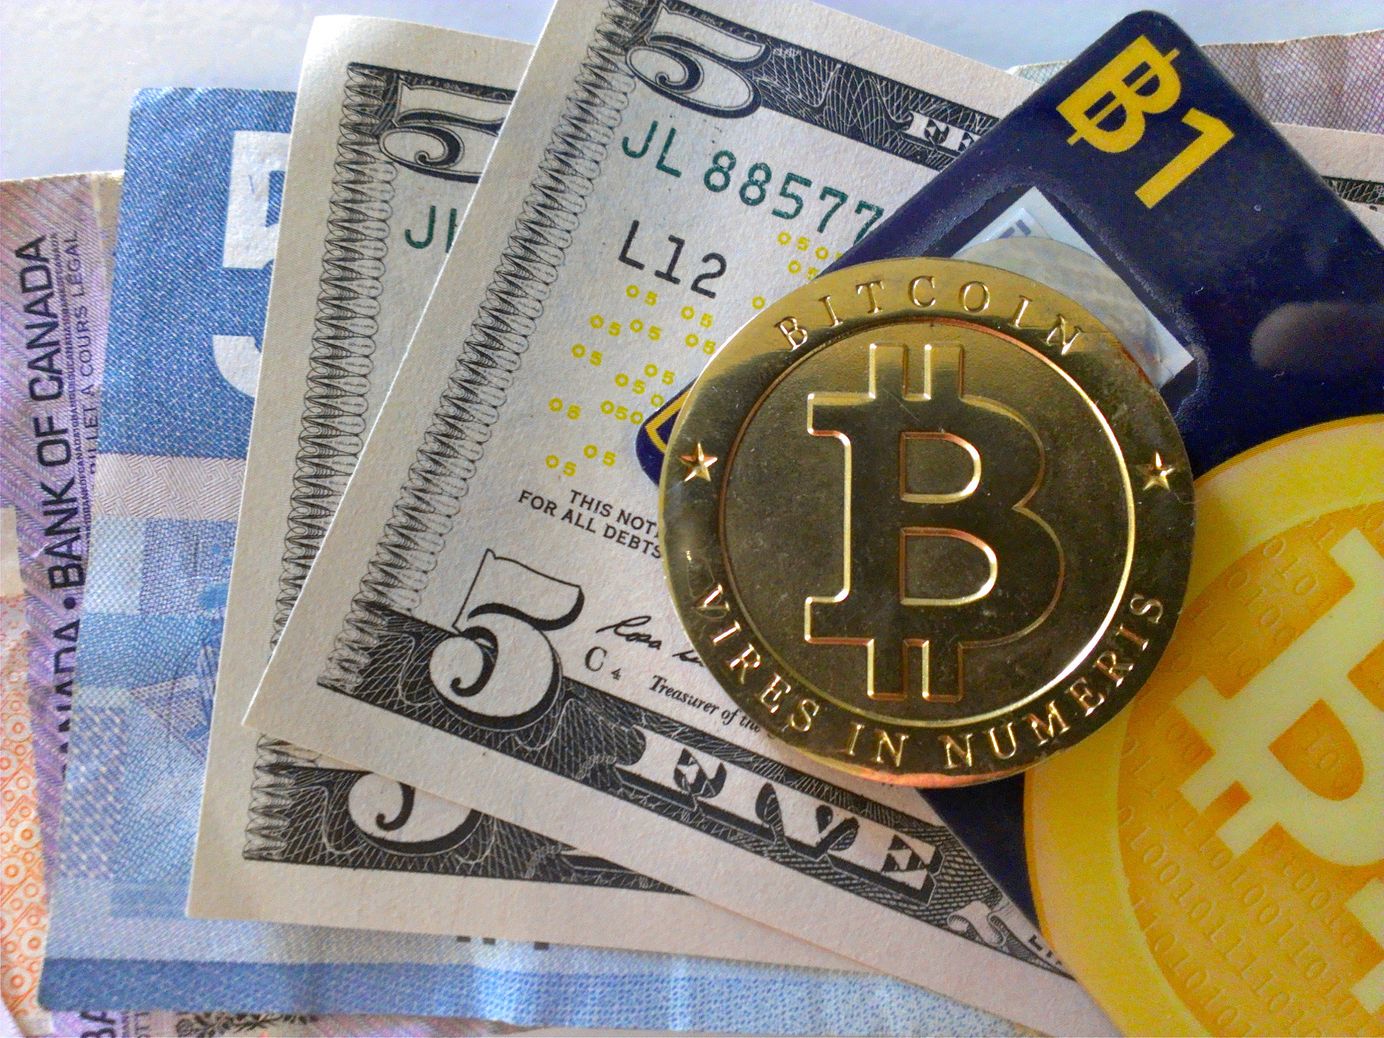 Australia warns about scammers collecting extra charges in Bitcoin